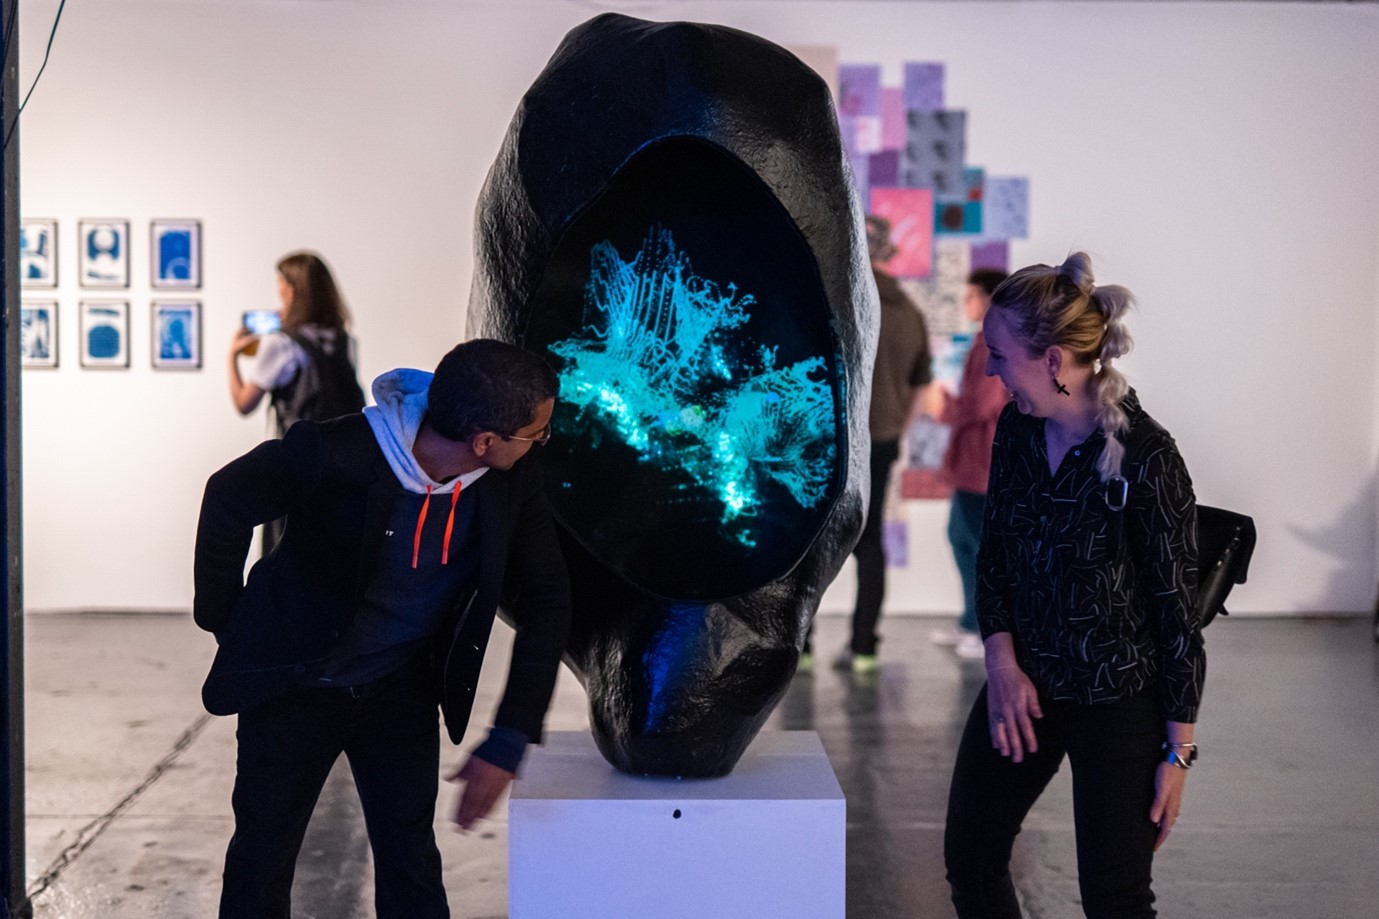 The photograph shows a blond, white female and a south-asian male interacting with a motion sensitive artwork within an art gallery space. The artwork consists of a large black shell-like structure into which is projected a colourful turquoise audio-visual display of an abstract matrix which shifts in shape and which artistically represents the process of DNA methylation.